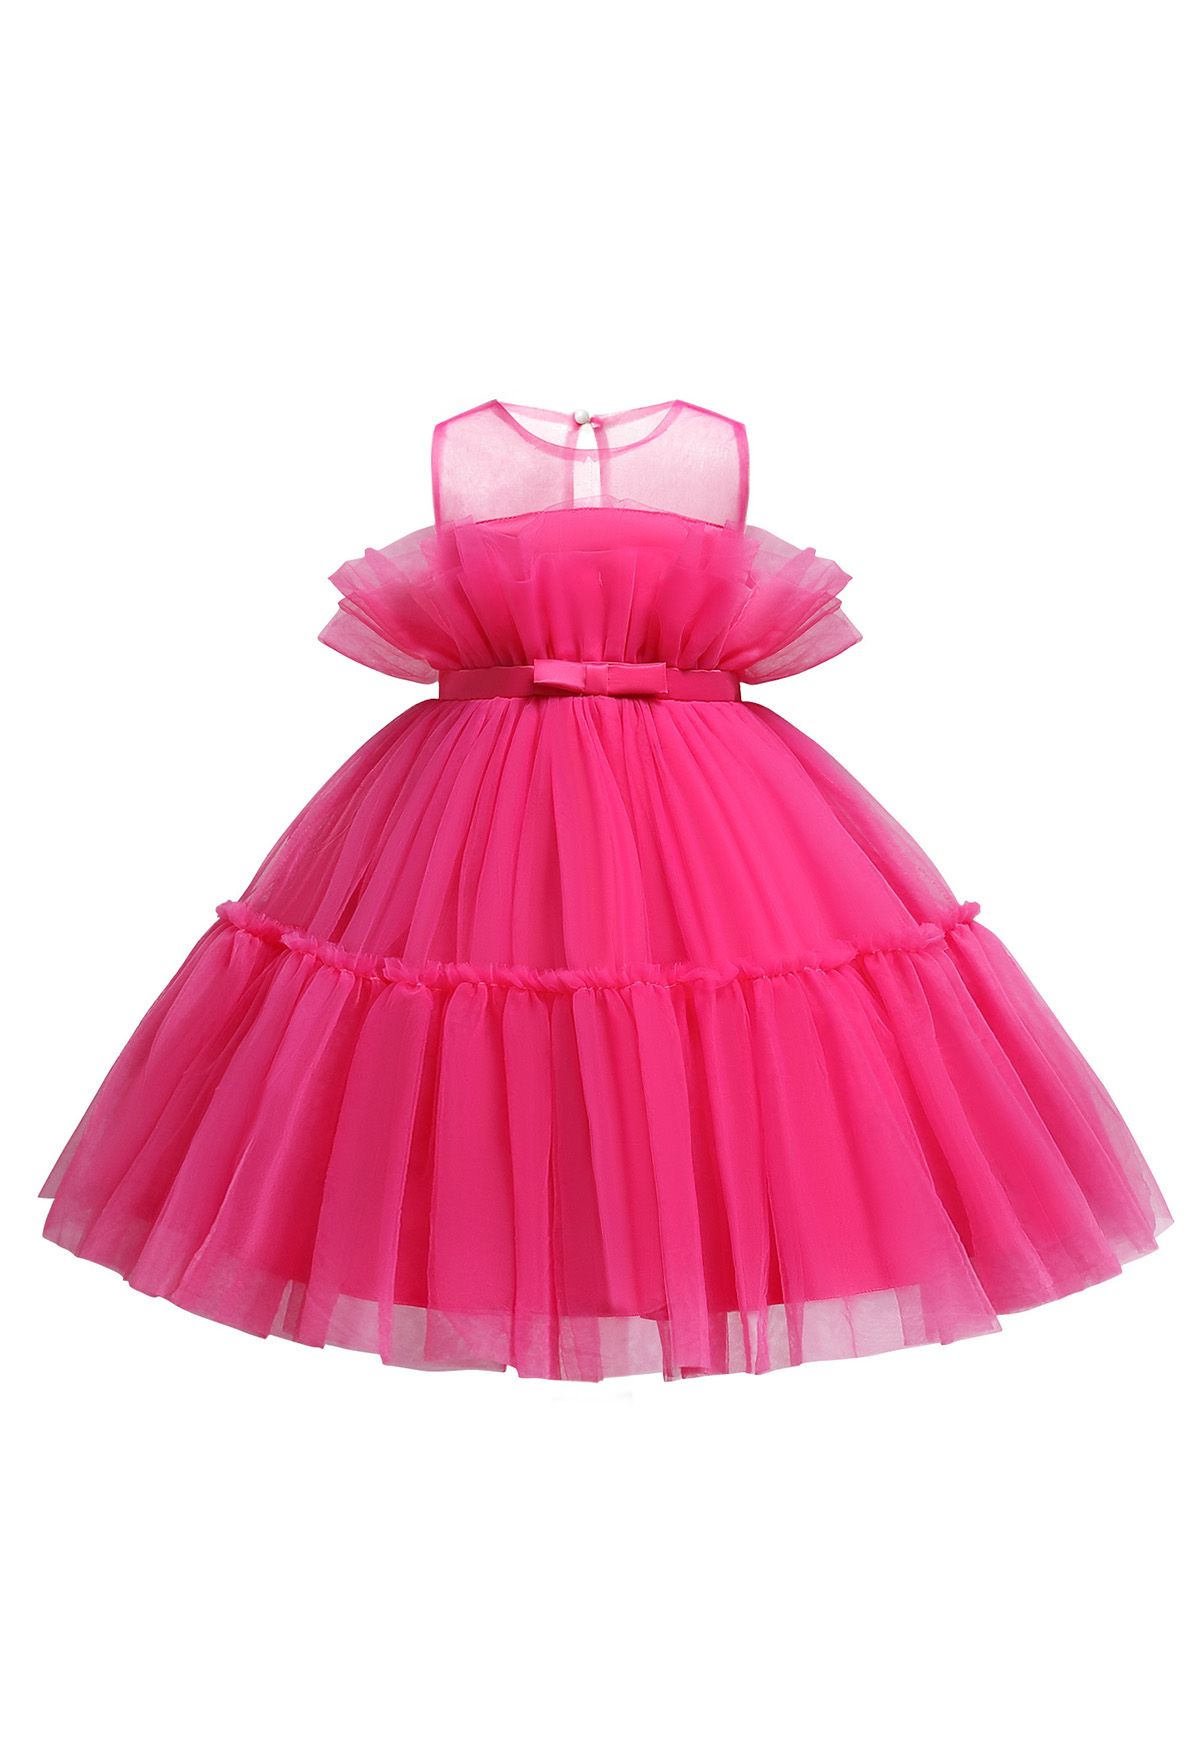 Bowknot Waist Tulle Dress in Magenta for Kids